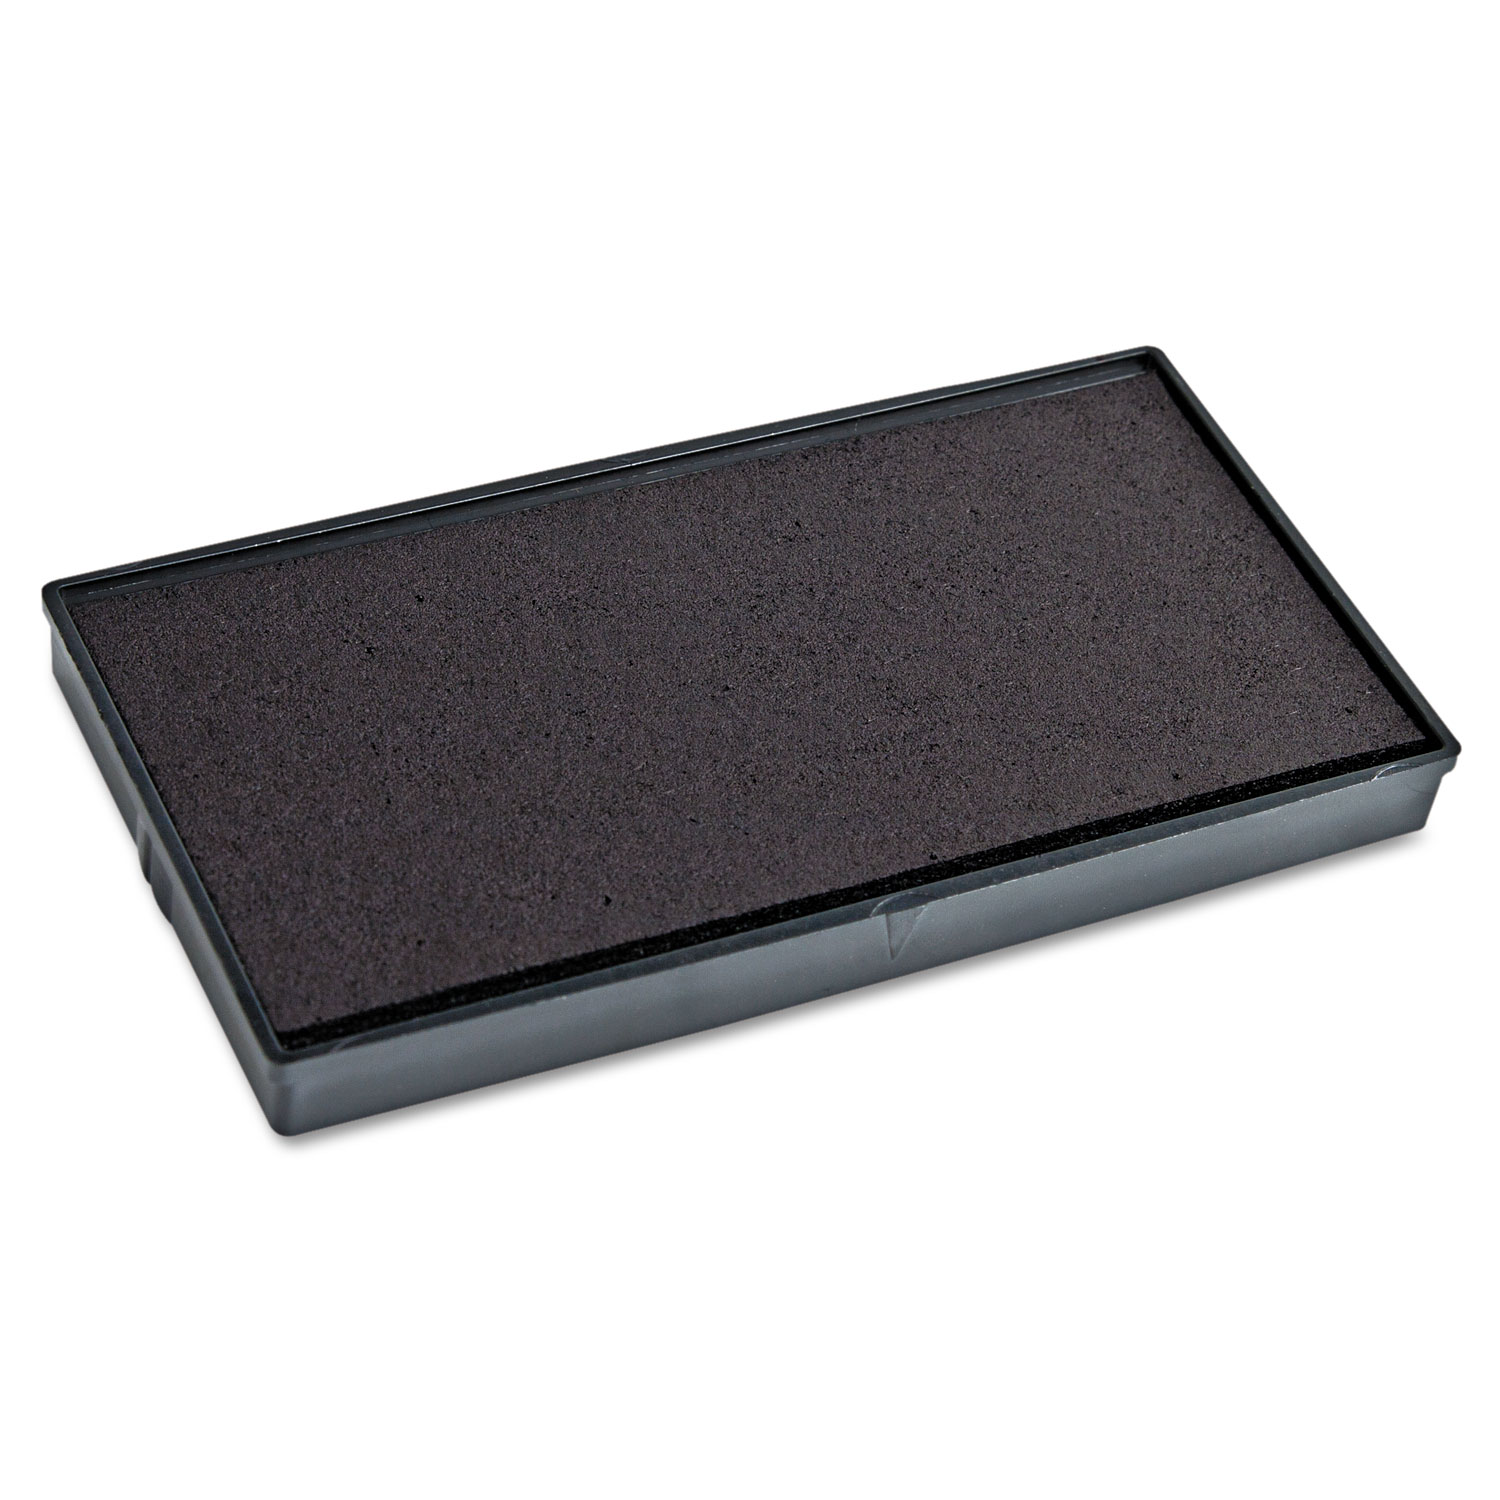 Replacement Ink Pad for 2000PLUS 1SI40PGL & 1SI40P, Black